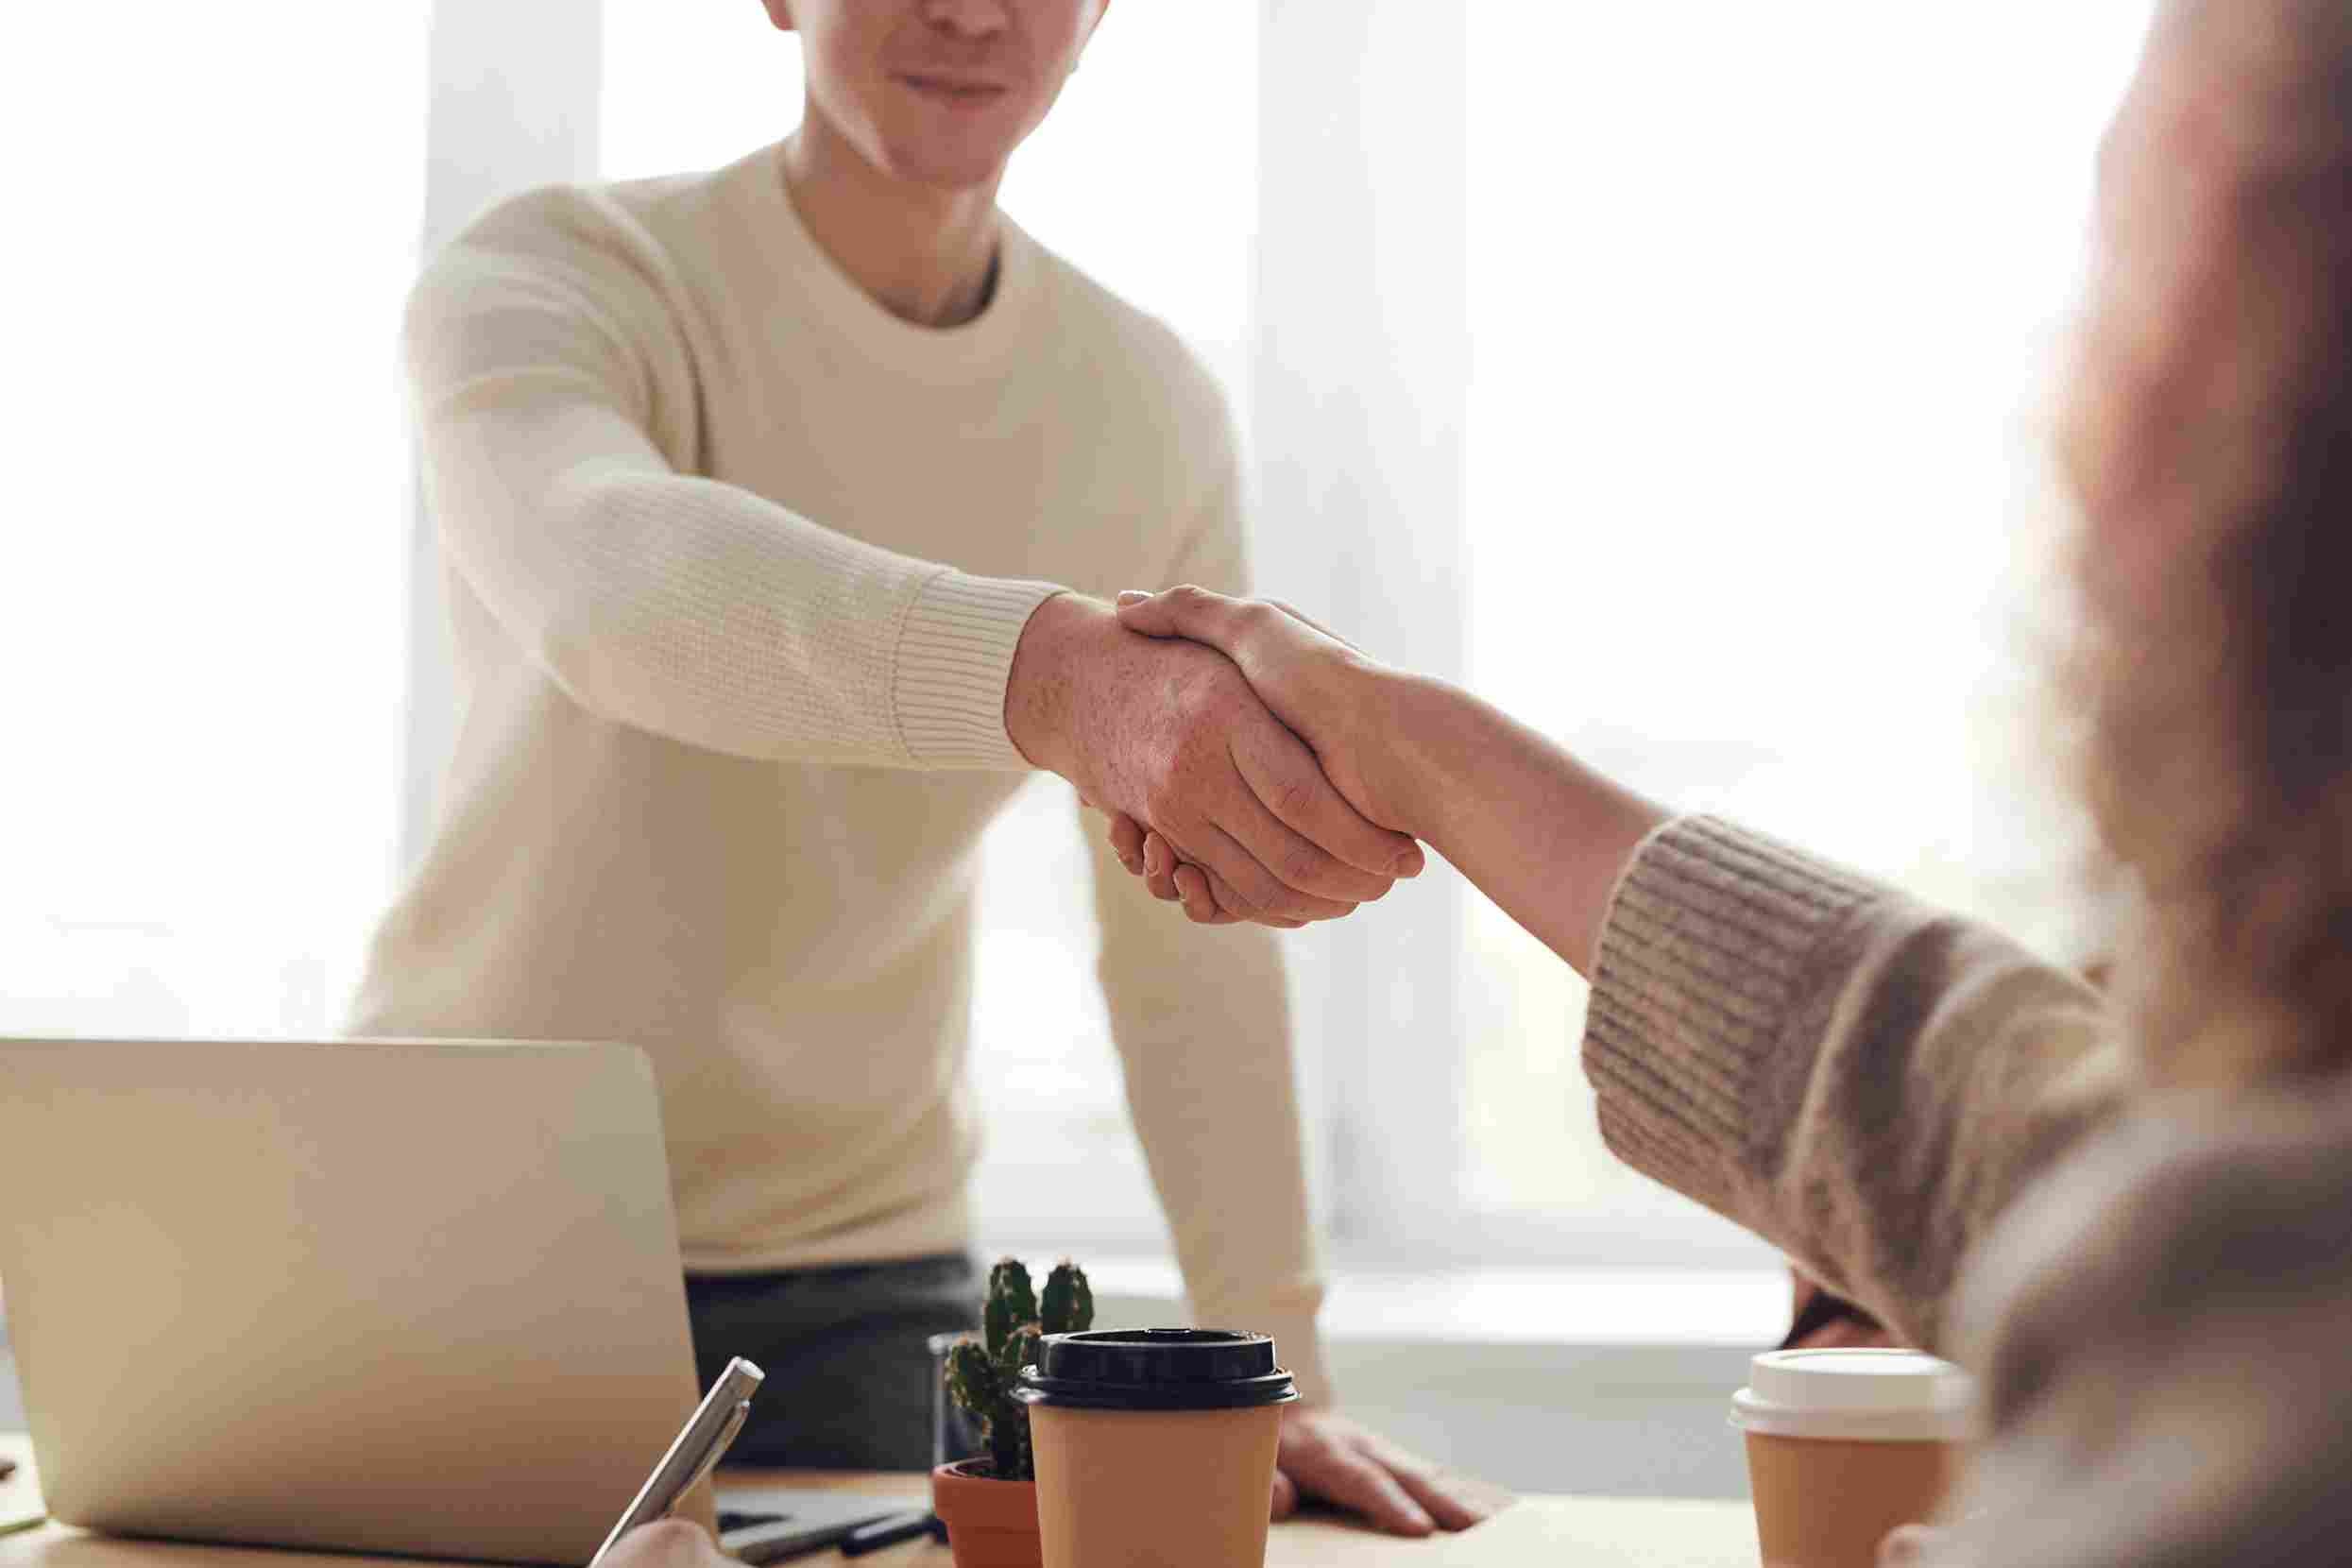 An individual shakes the hand of the hiring manager as he accepts a new job. The hiring manager is concerned he may become bored easily in his new role.